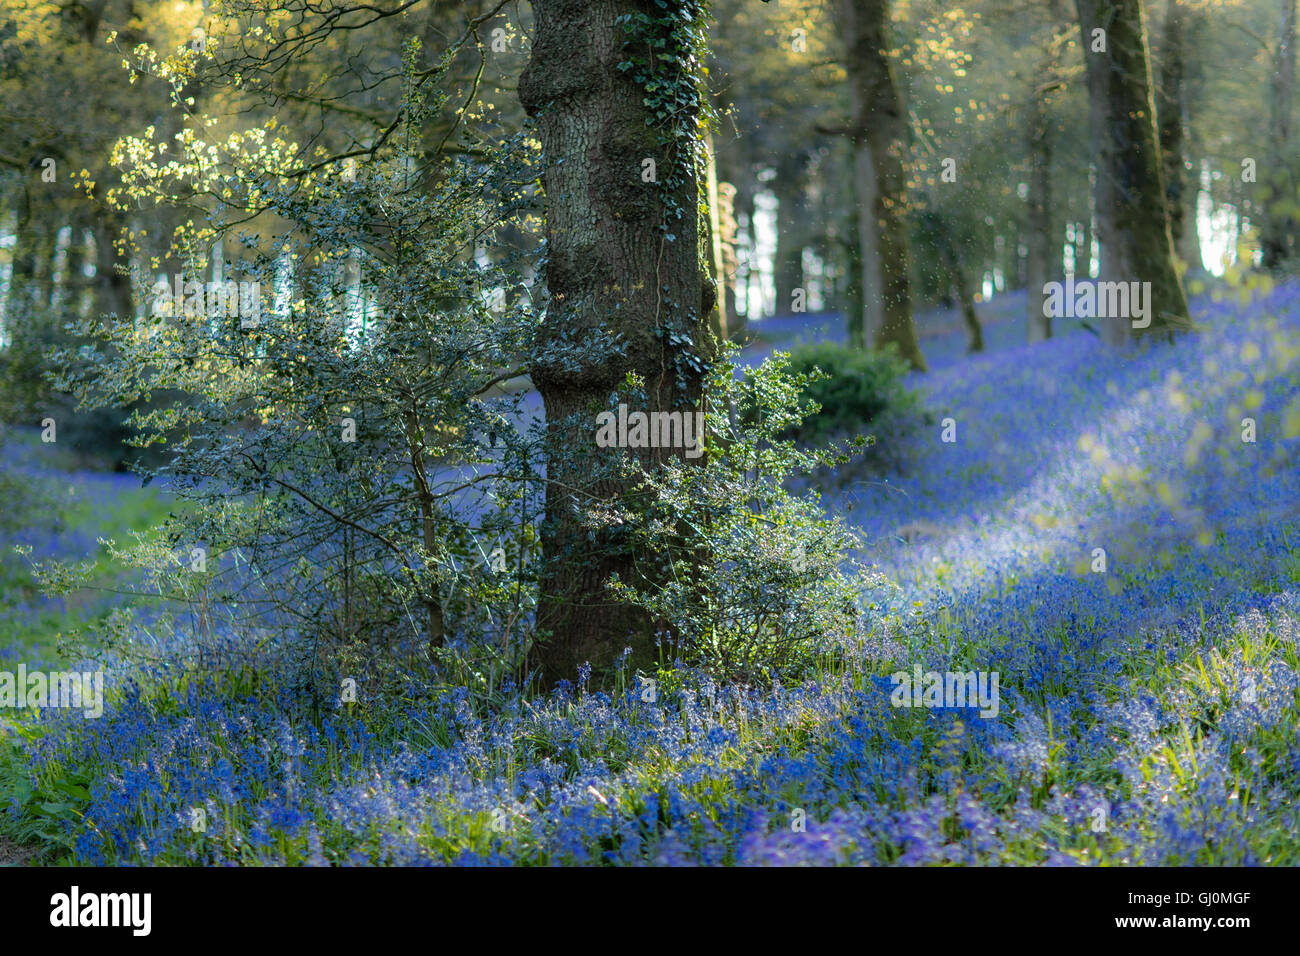 bluebells in the woods near Minterne Magna, Dorset, England Stock Photo